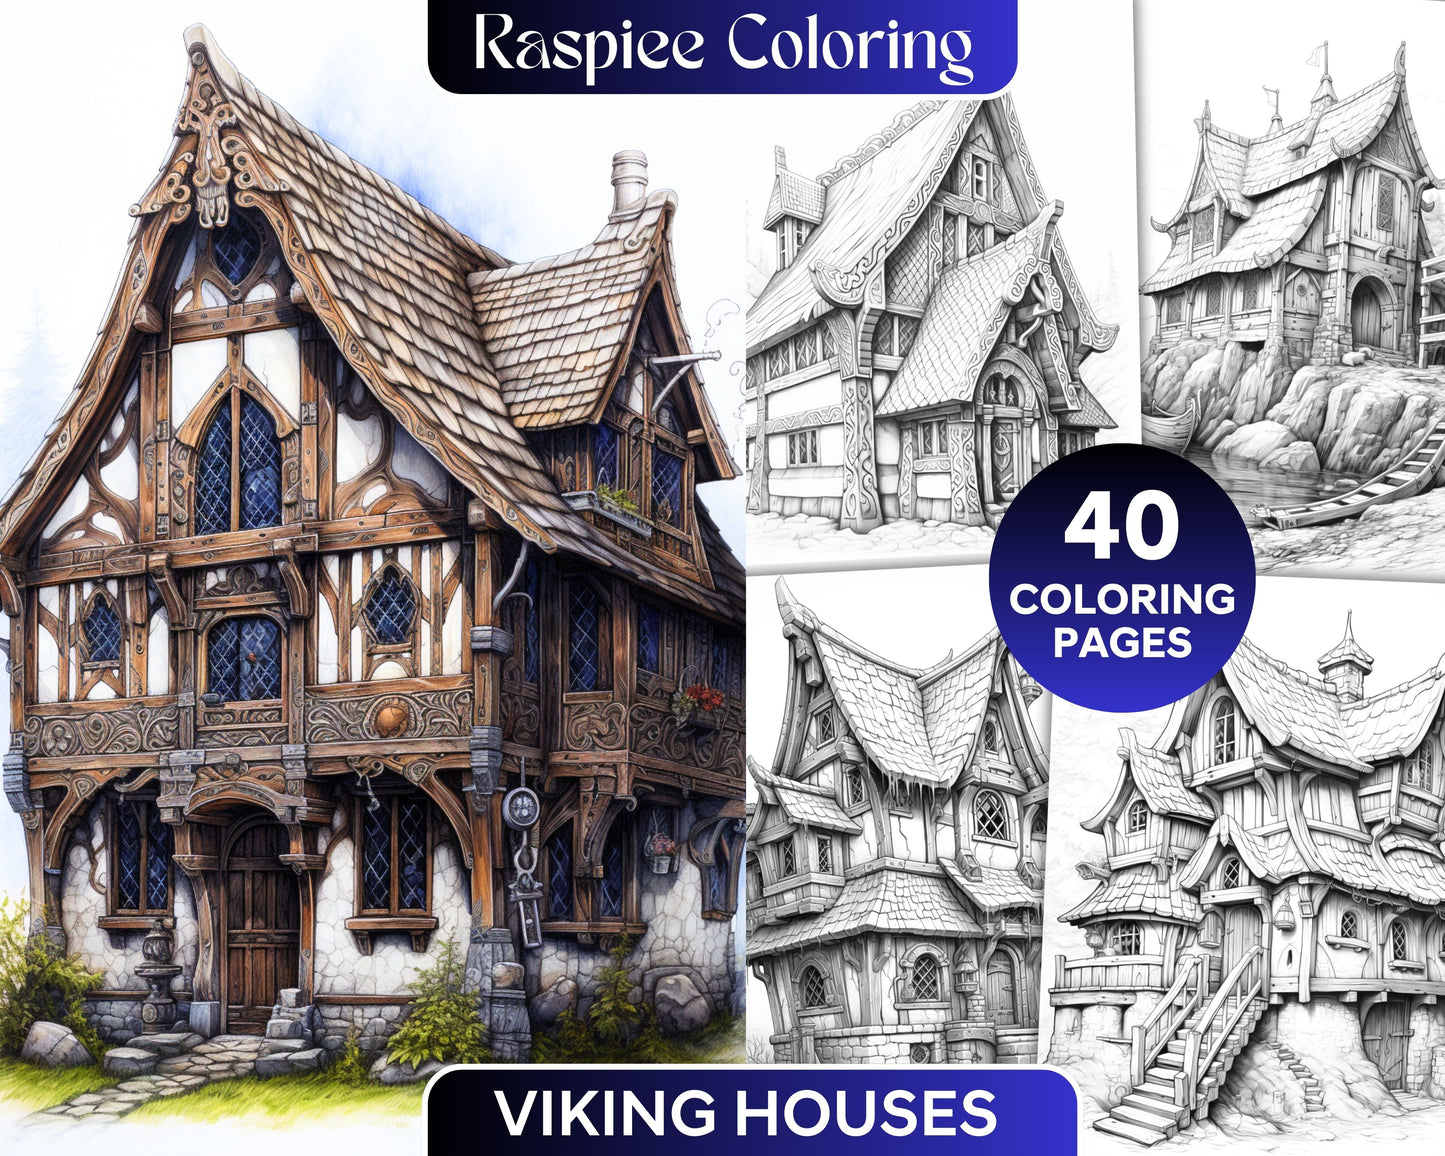 Grayscale coloring pages of Viking houses, Printable grayscale coloring sheets for adults, Viking art coloring pages for stress relief, Nordic theme grayscale illustrations for coloring, Adult coloring pages of Viking houses